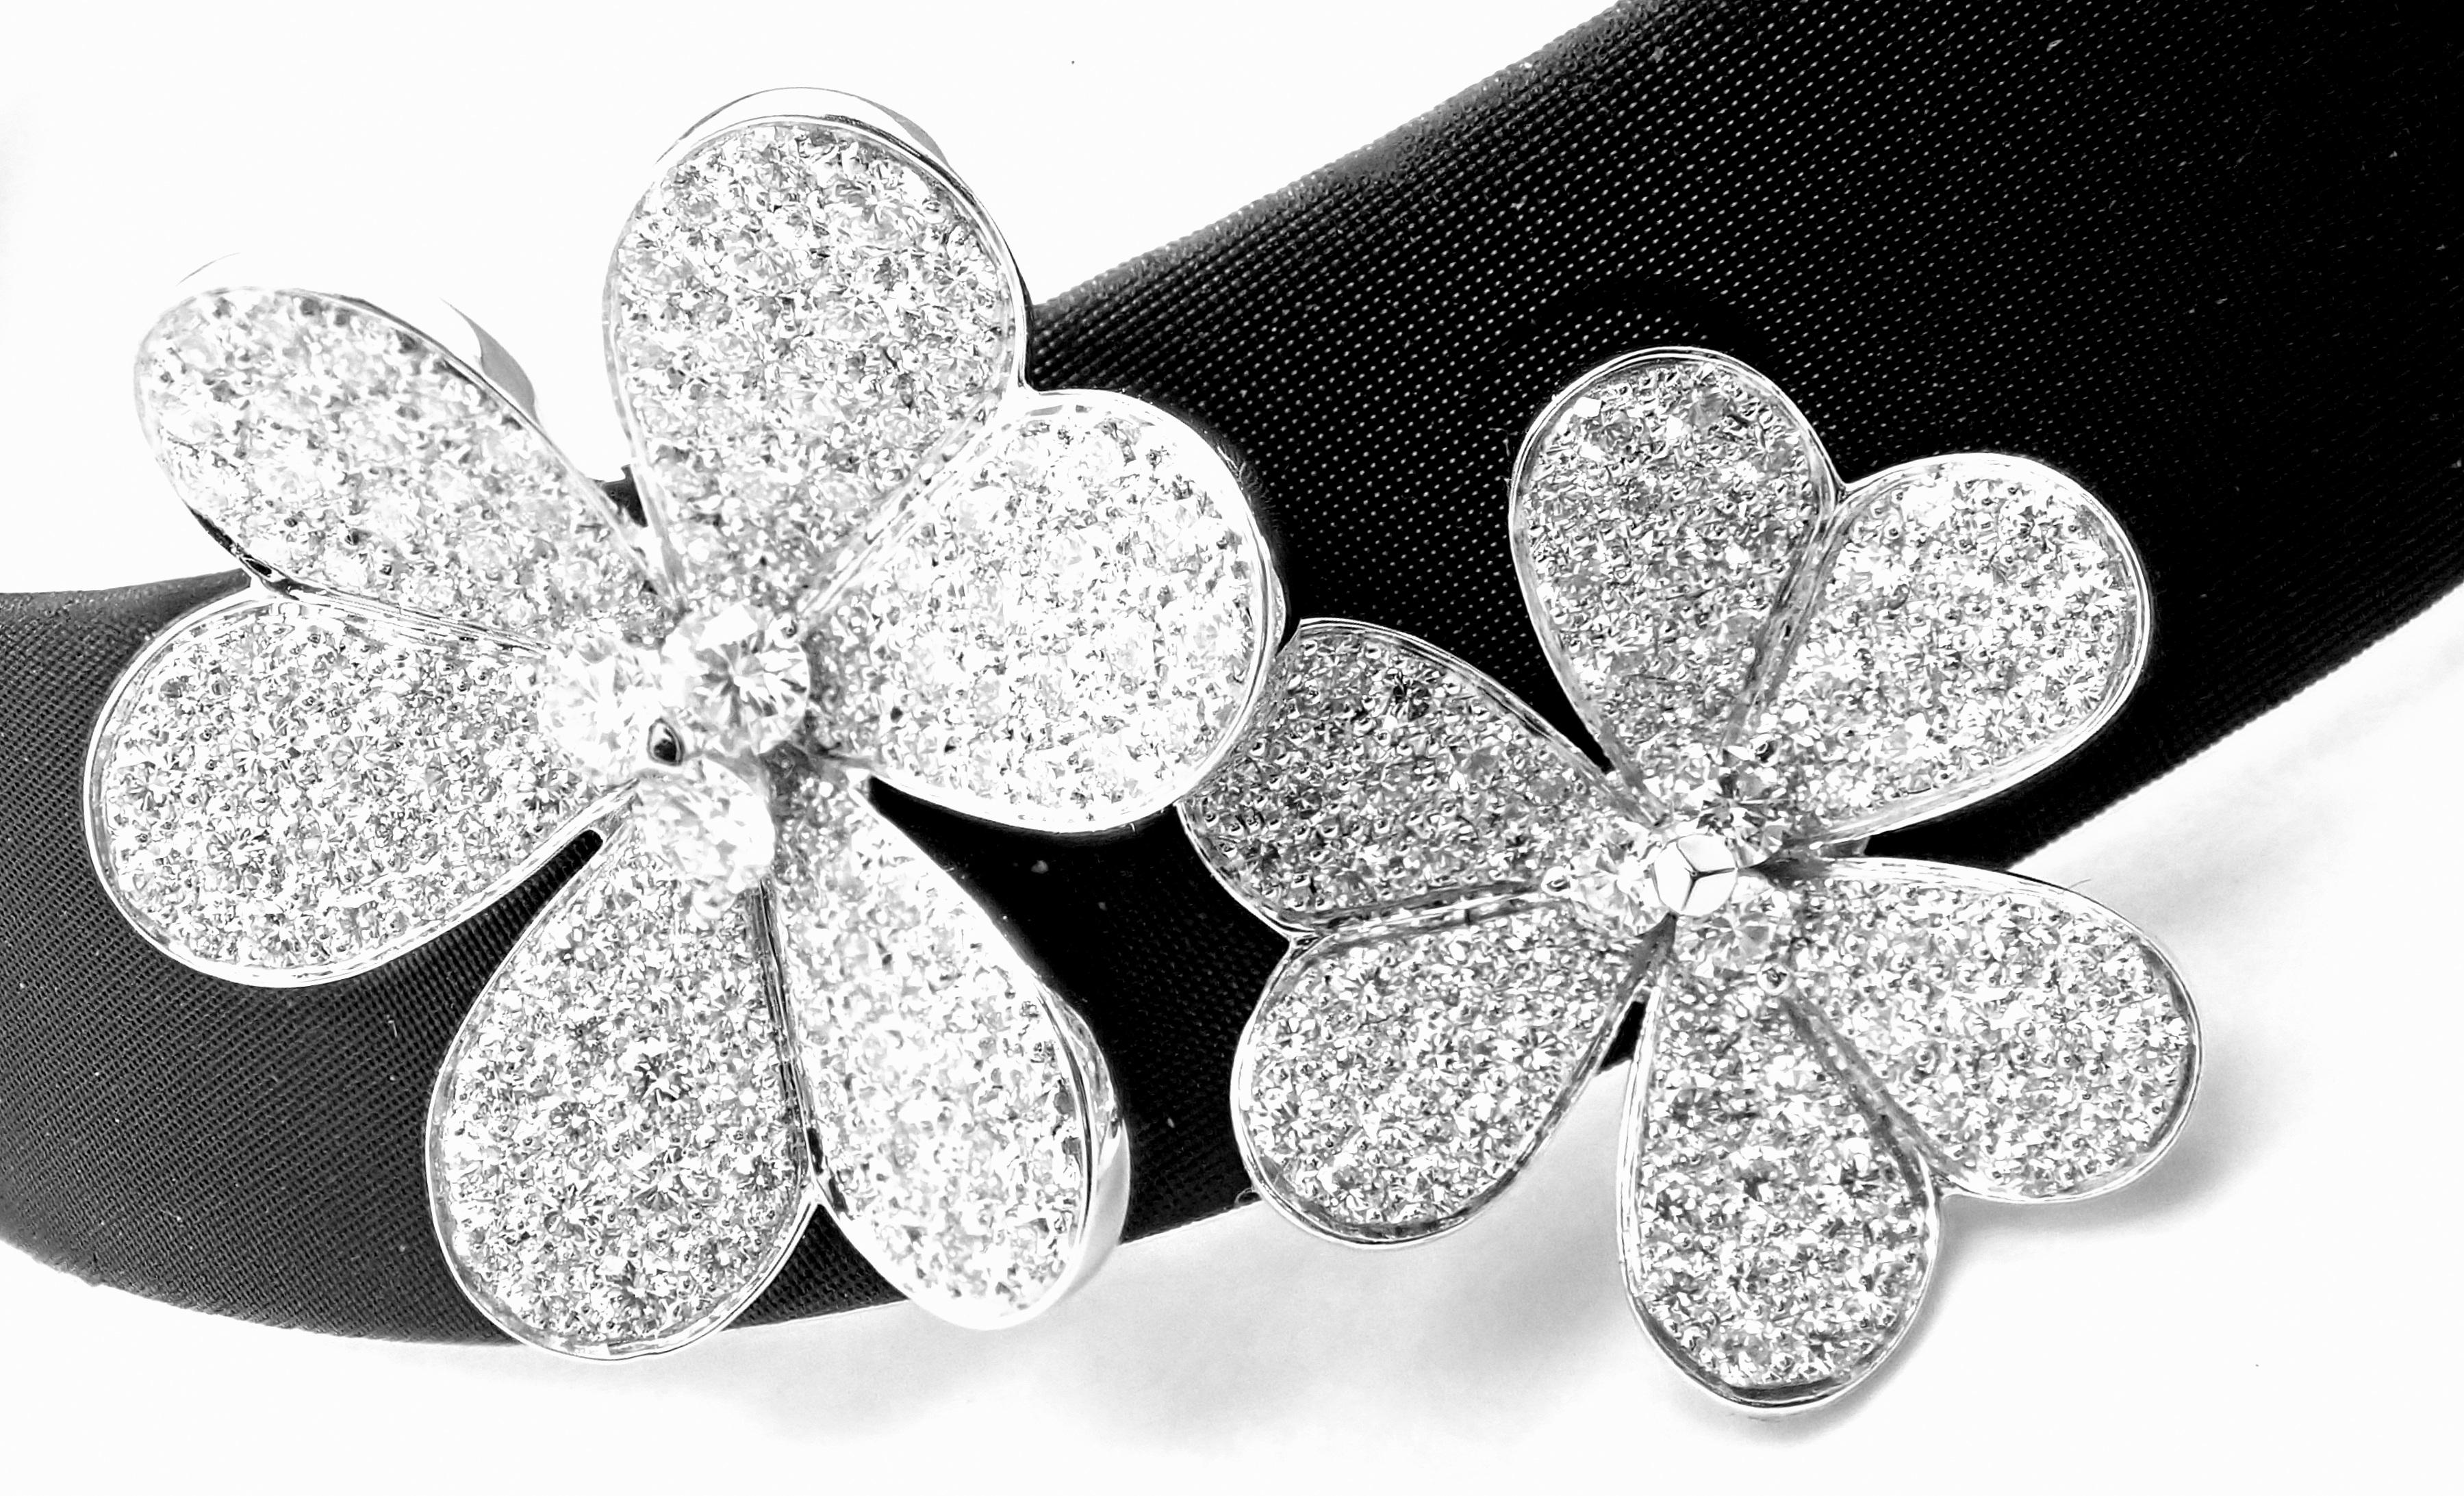 18k White Gold Frivole Diamond Flower Necklace by Van Cleef & Arpels. 
This Necklace is a special order.
With Brilliant round cut diamond VVS1 clarity, E color
total weight approximately 13.40ct
This necklace comes with Van Cleef & Arpels